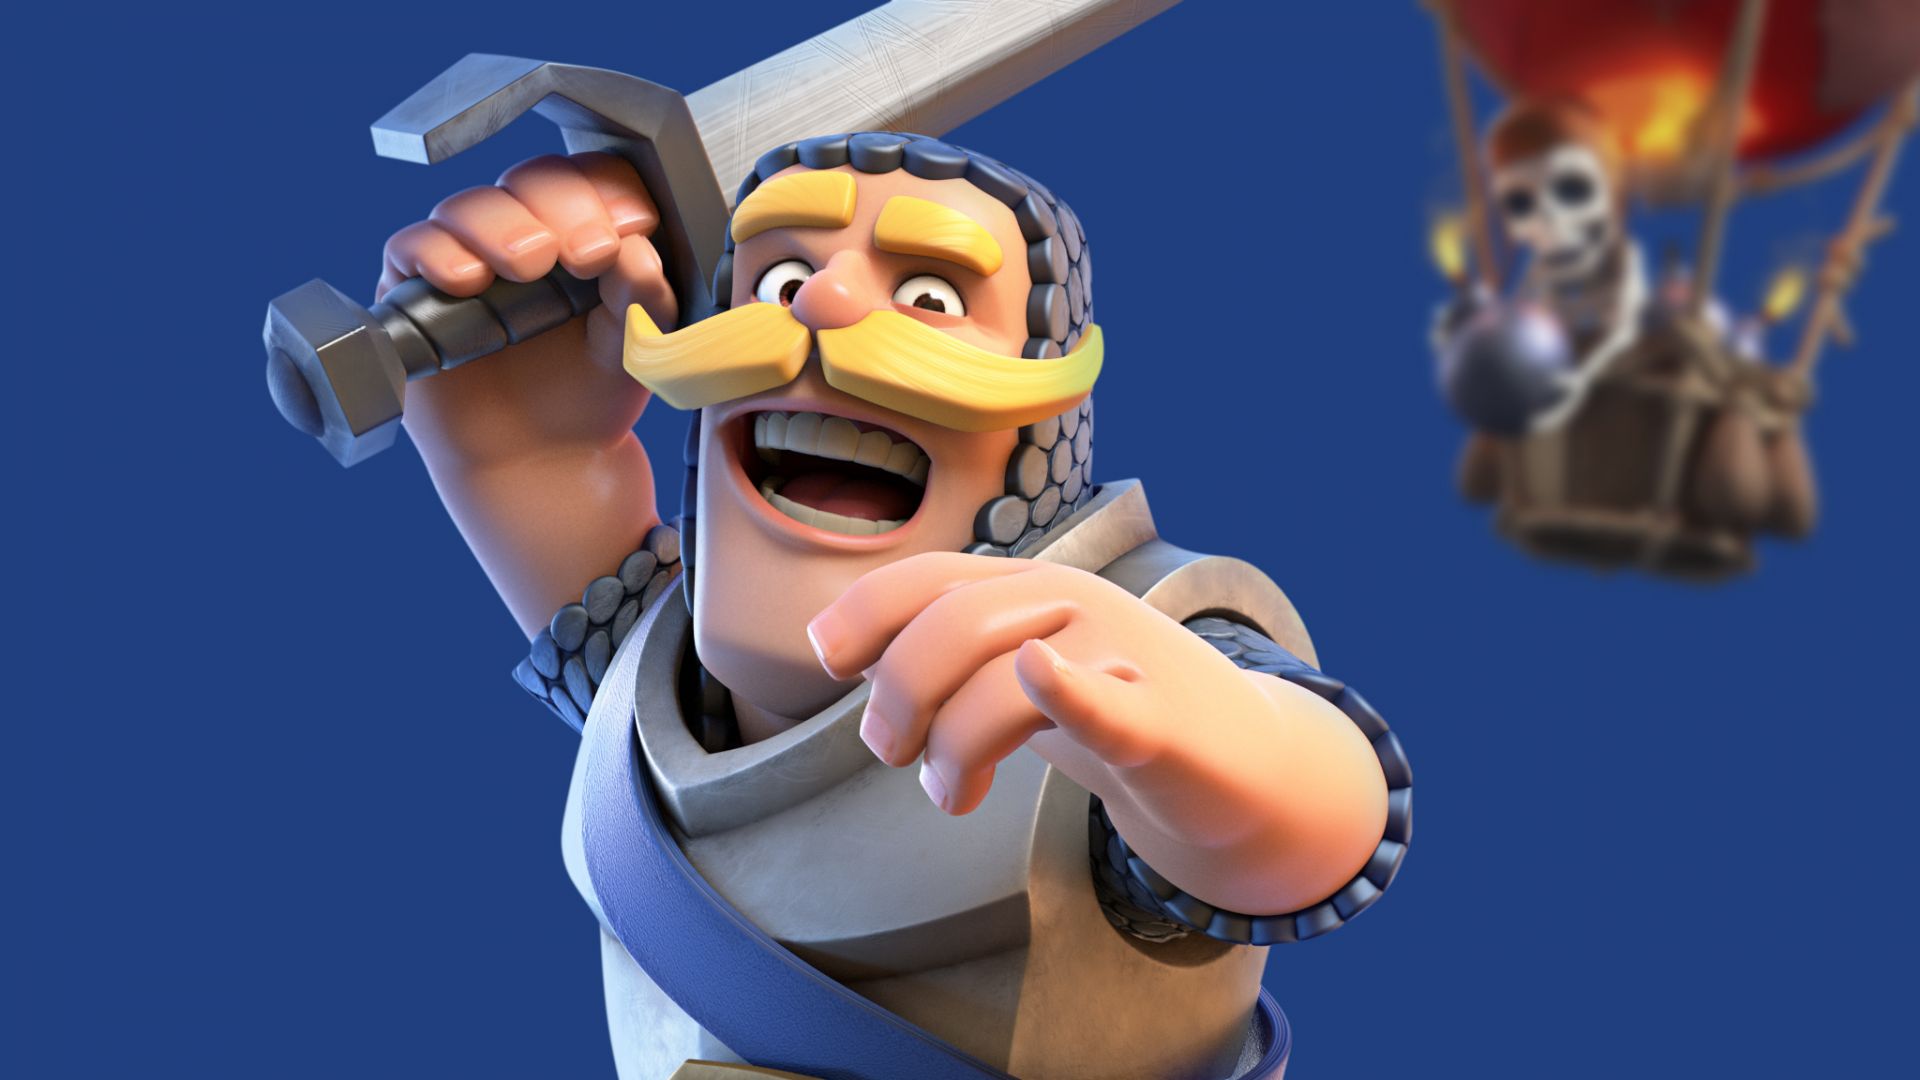 Wallpaper Clash royale, soldier, mobile game